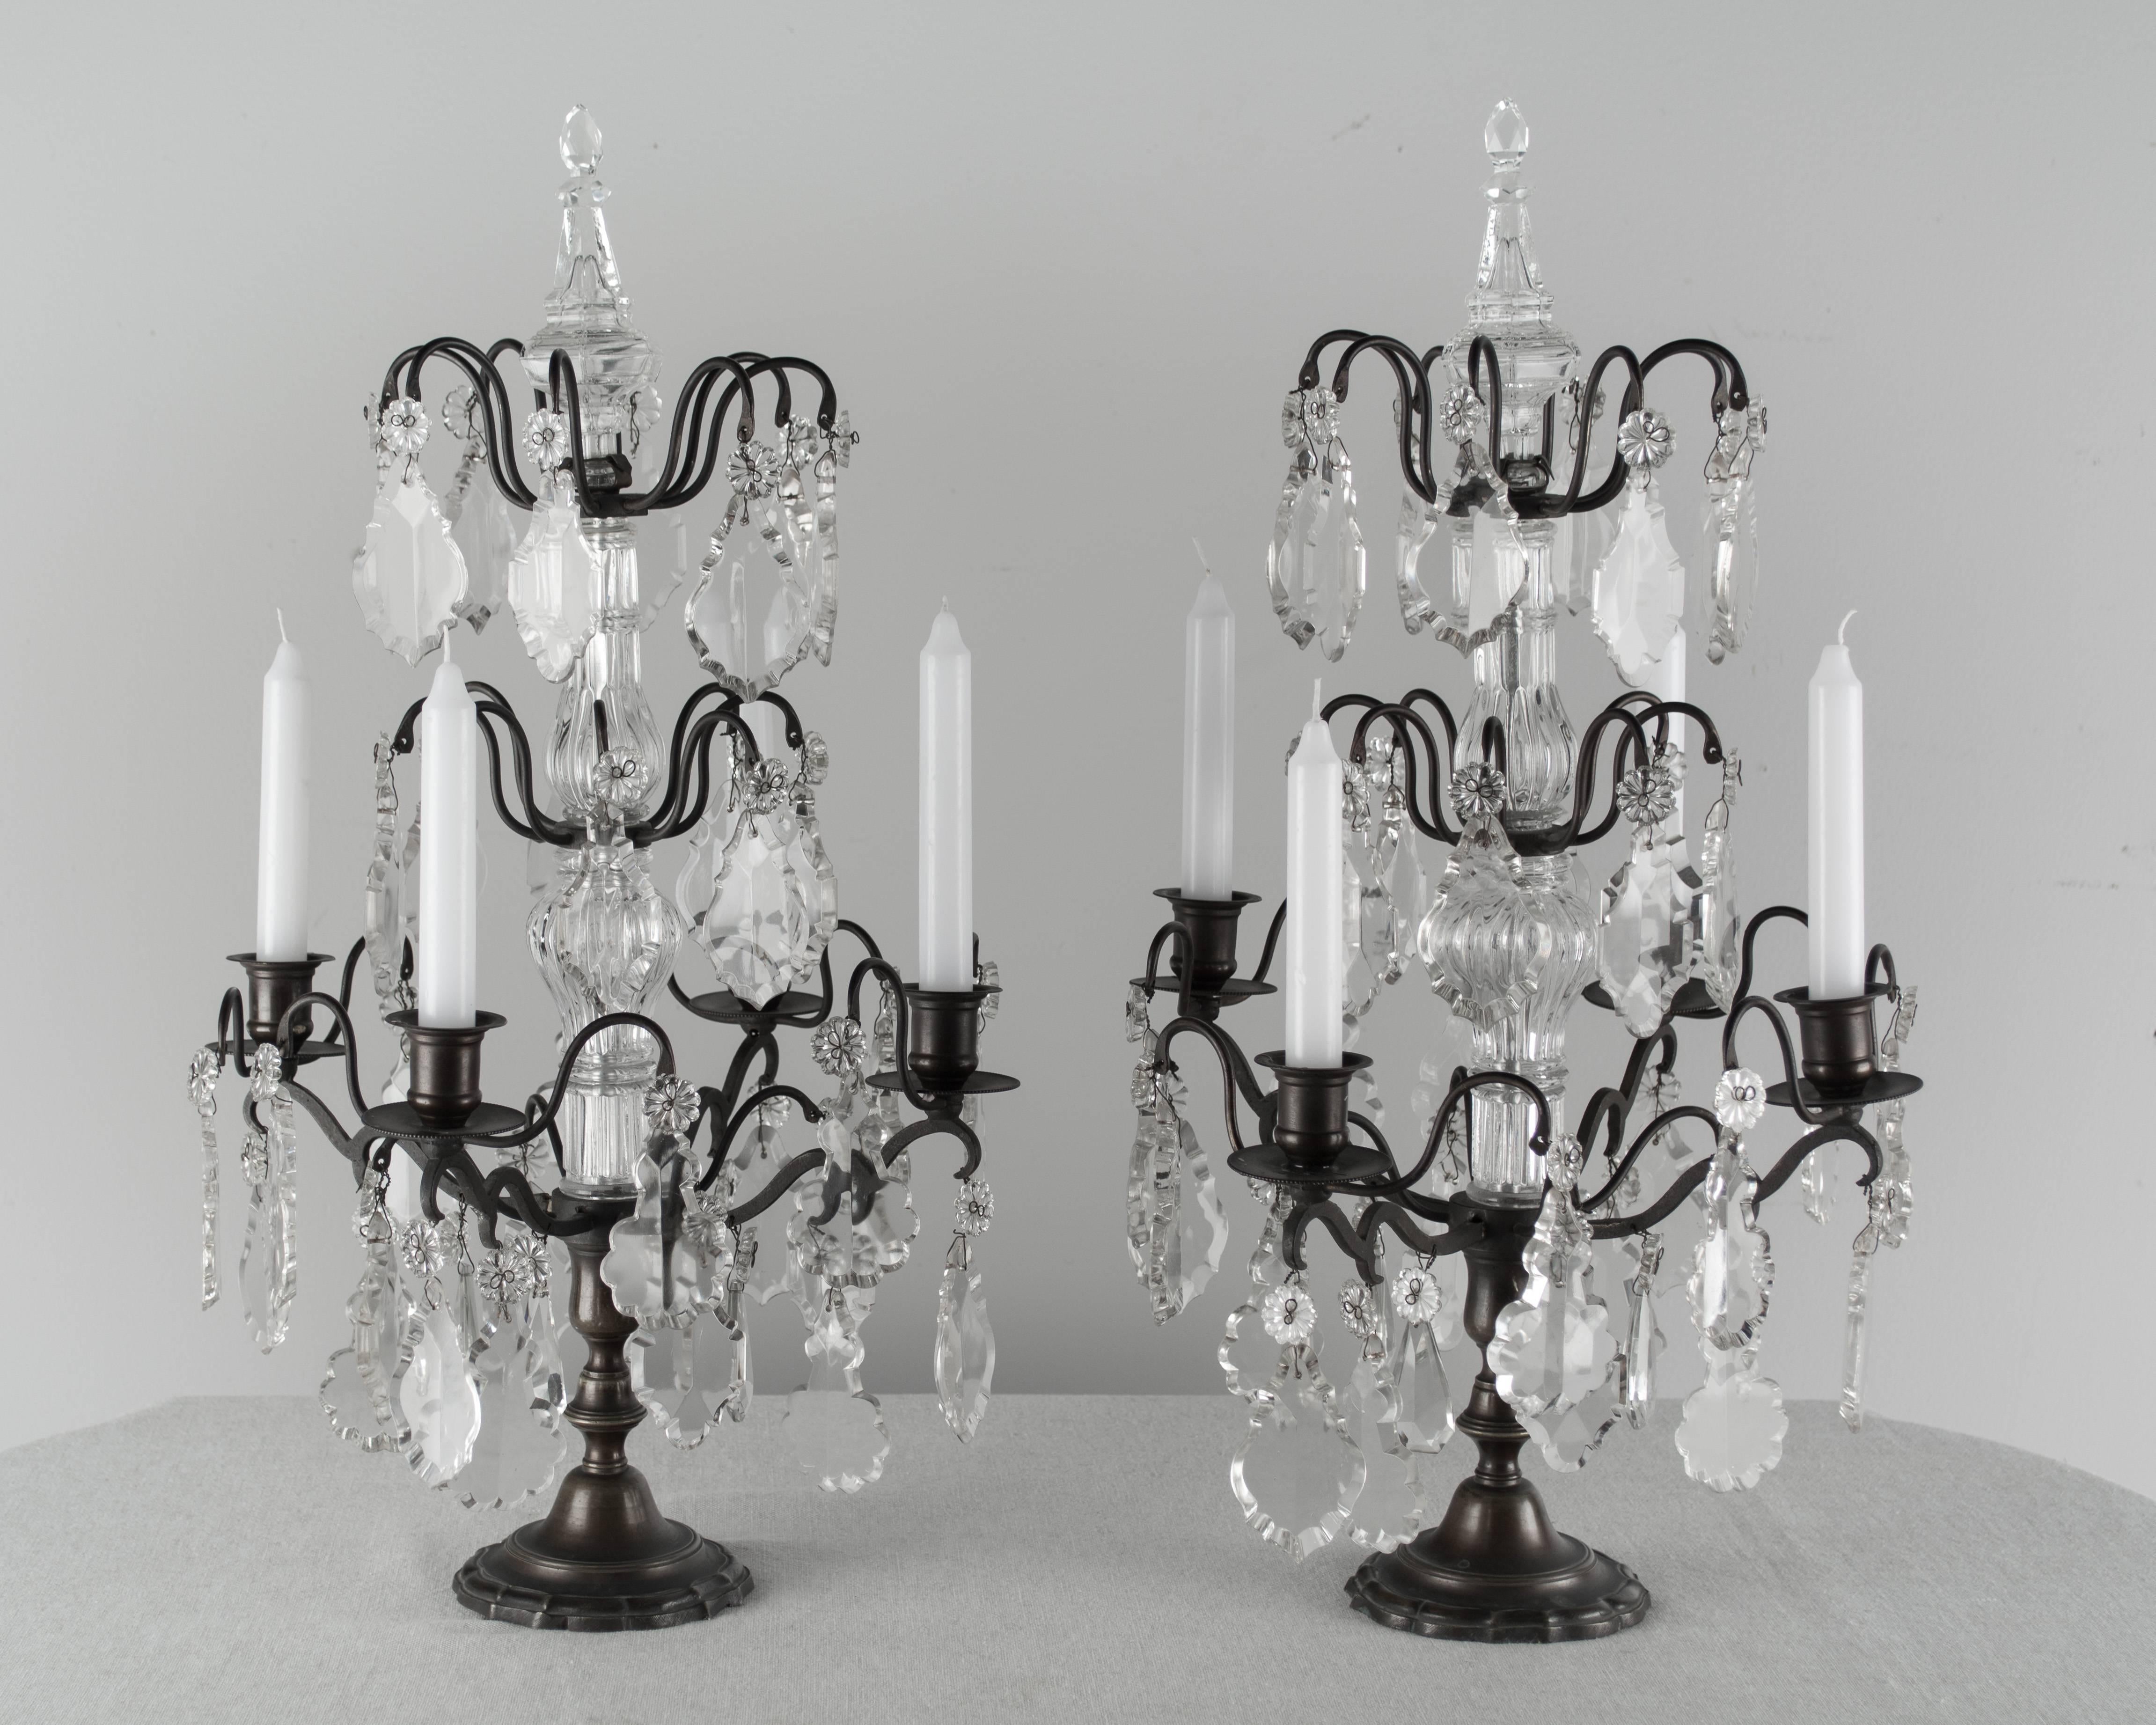 Pair of Louis XV style four-light French girandoles made of brass with antique bronze patina. Three tiers of crystal prisms of various shapes and sizes, crystal columns and finials. Tall, elegant proportions. These have not been rewired and are